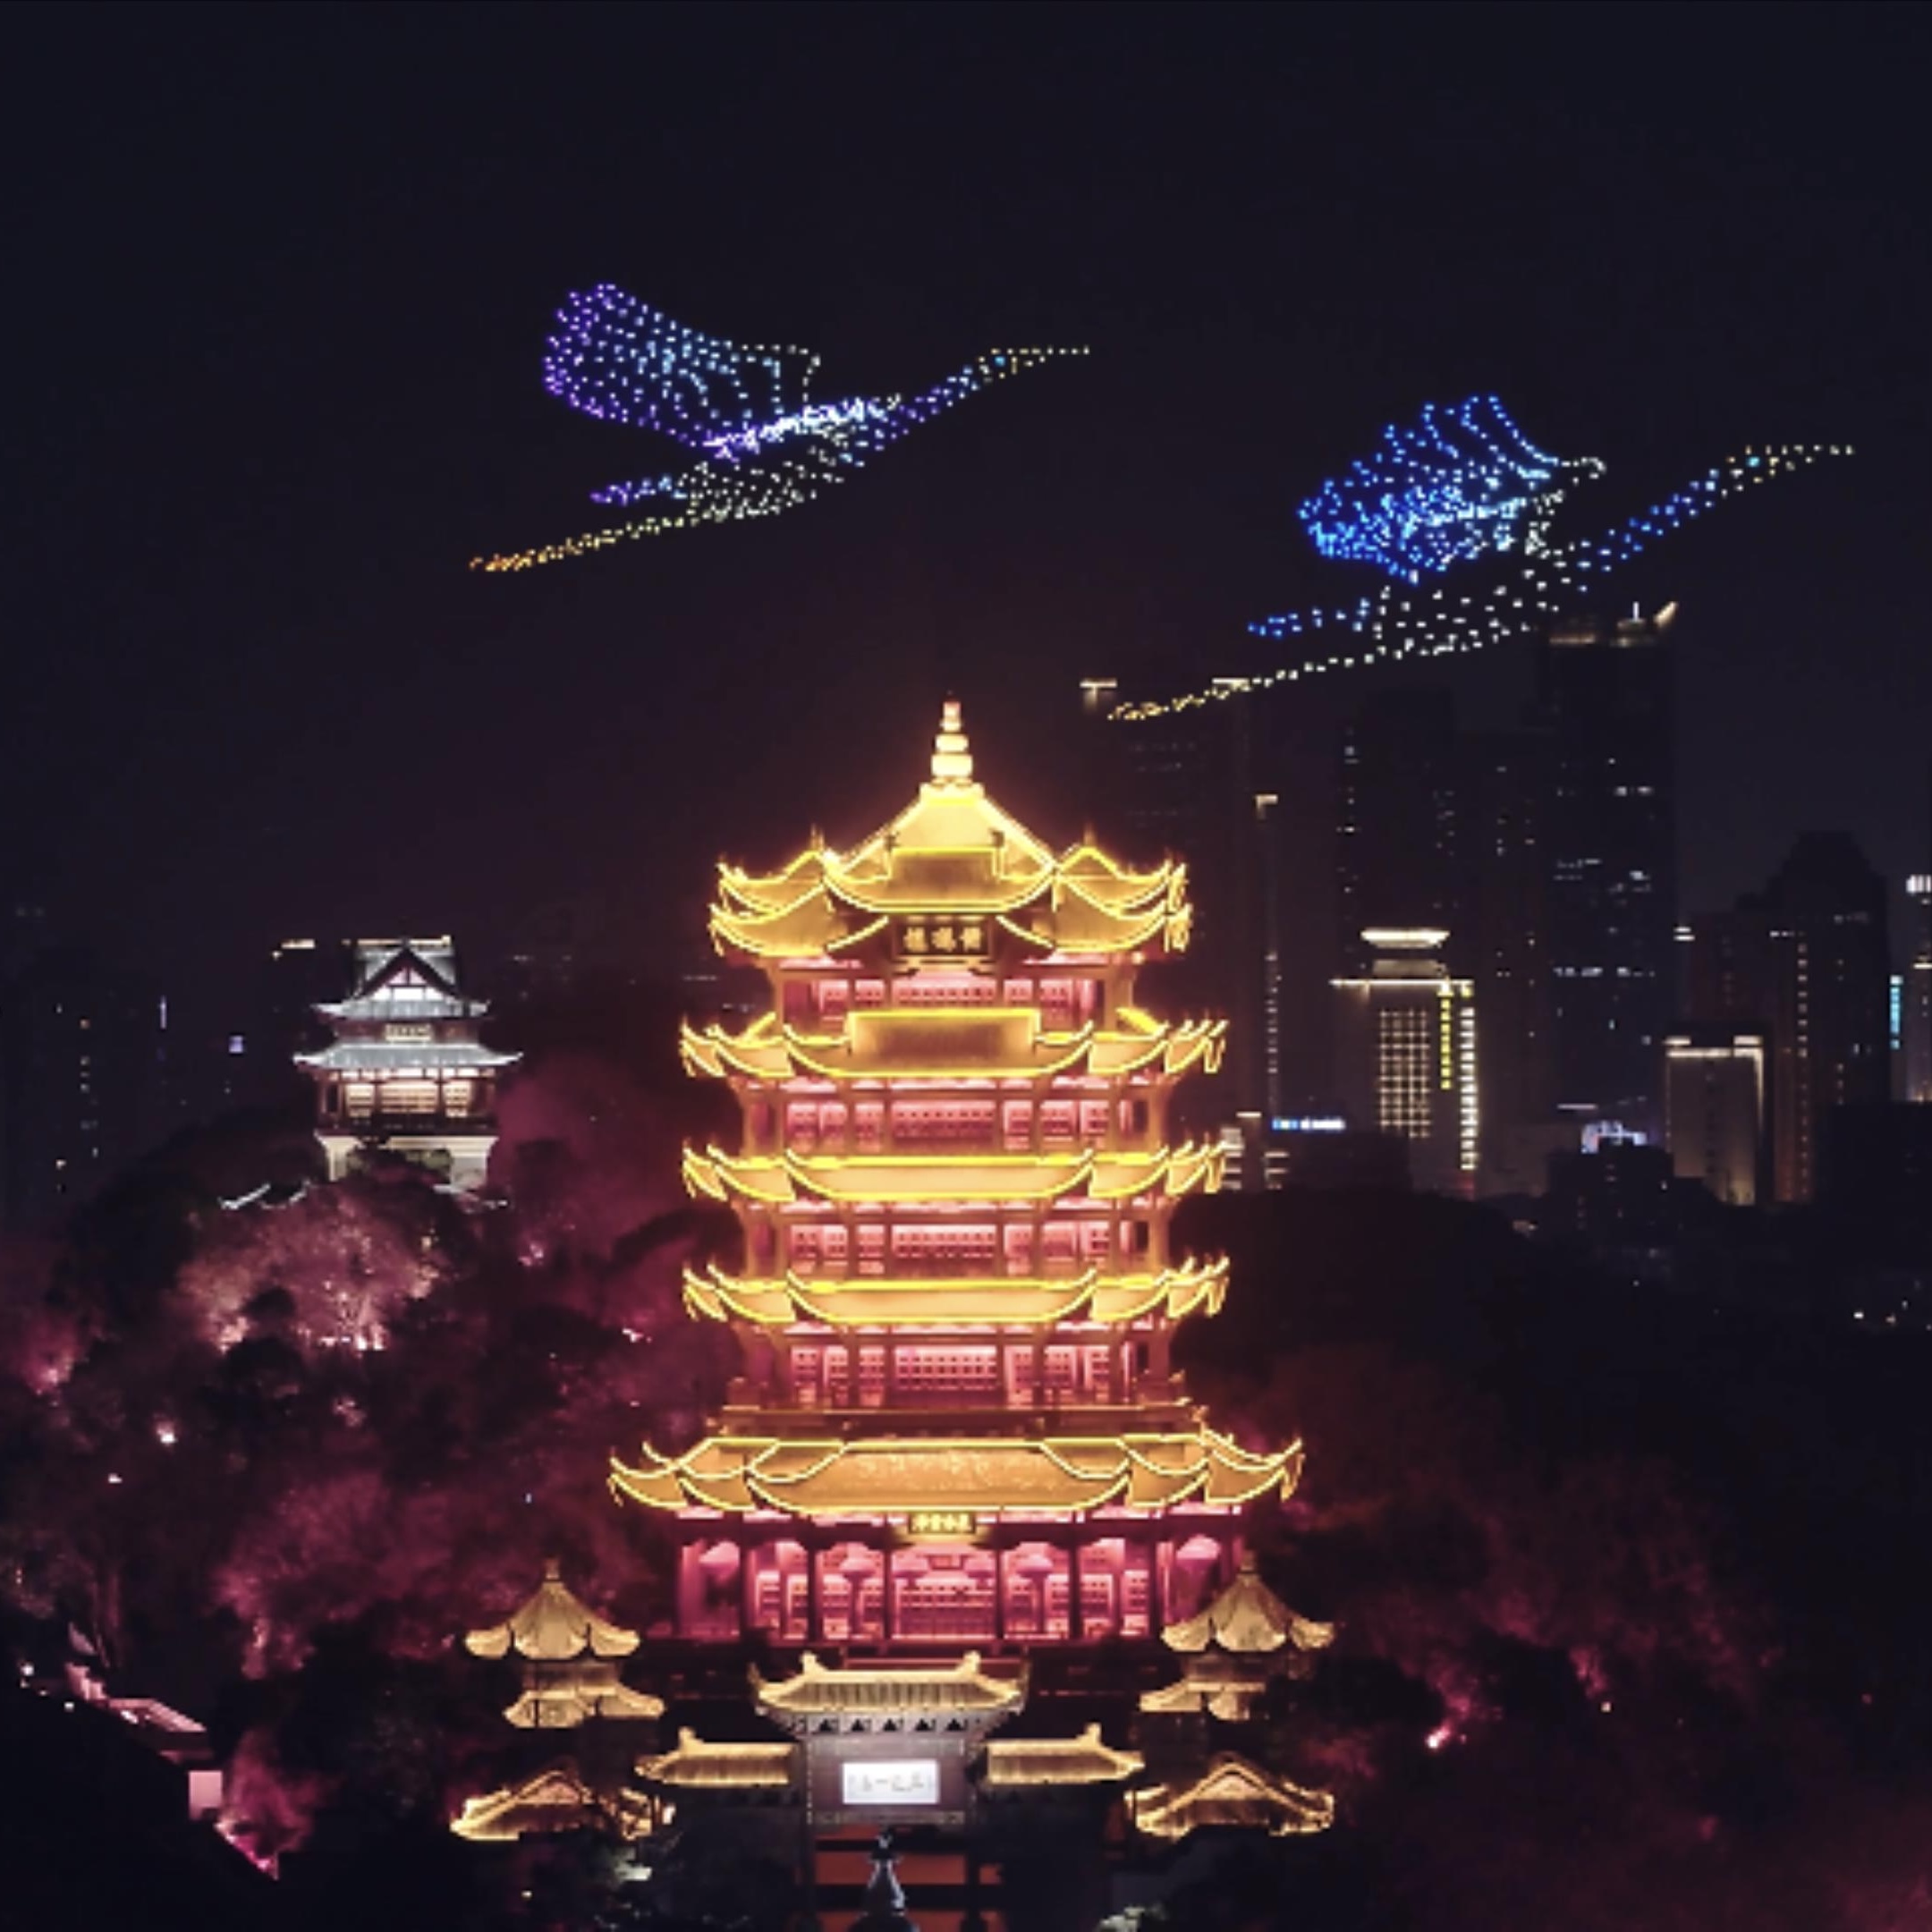 Wuhan Poetry Conference drone light show lights up the Yellow Crane Tower!